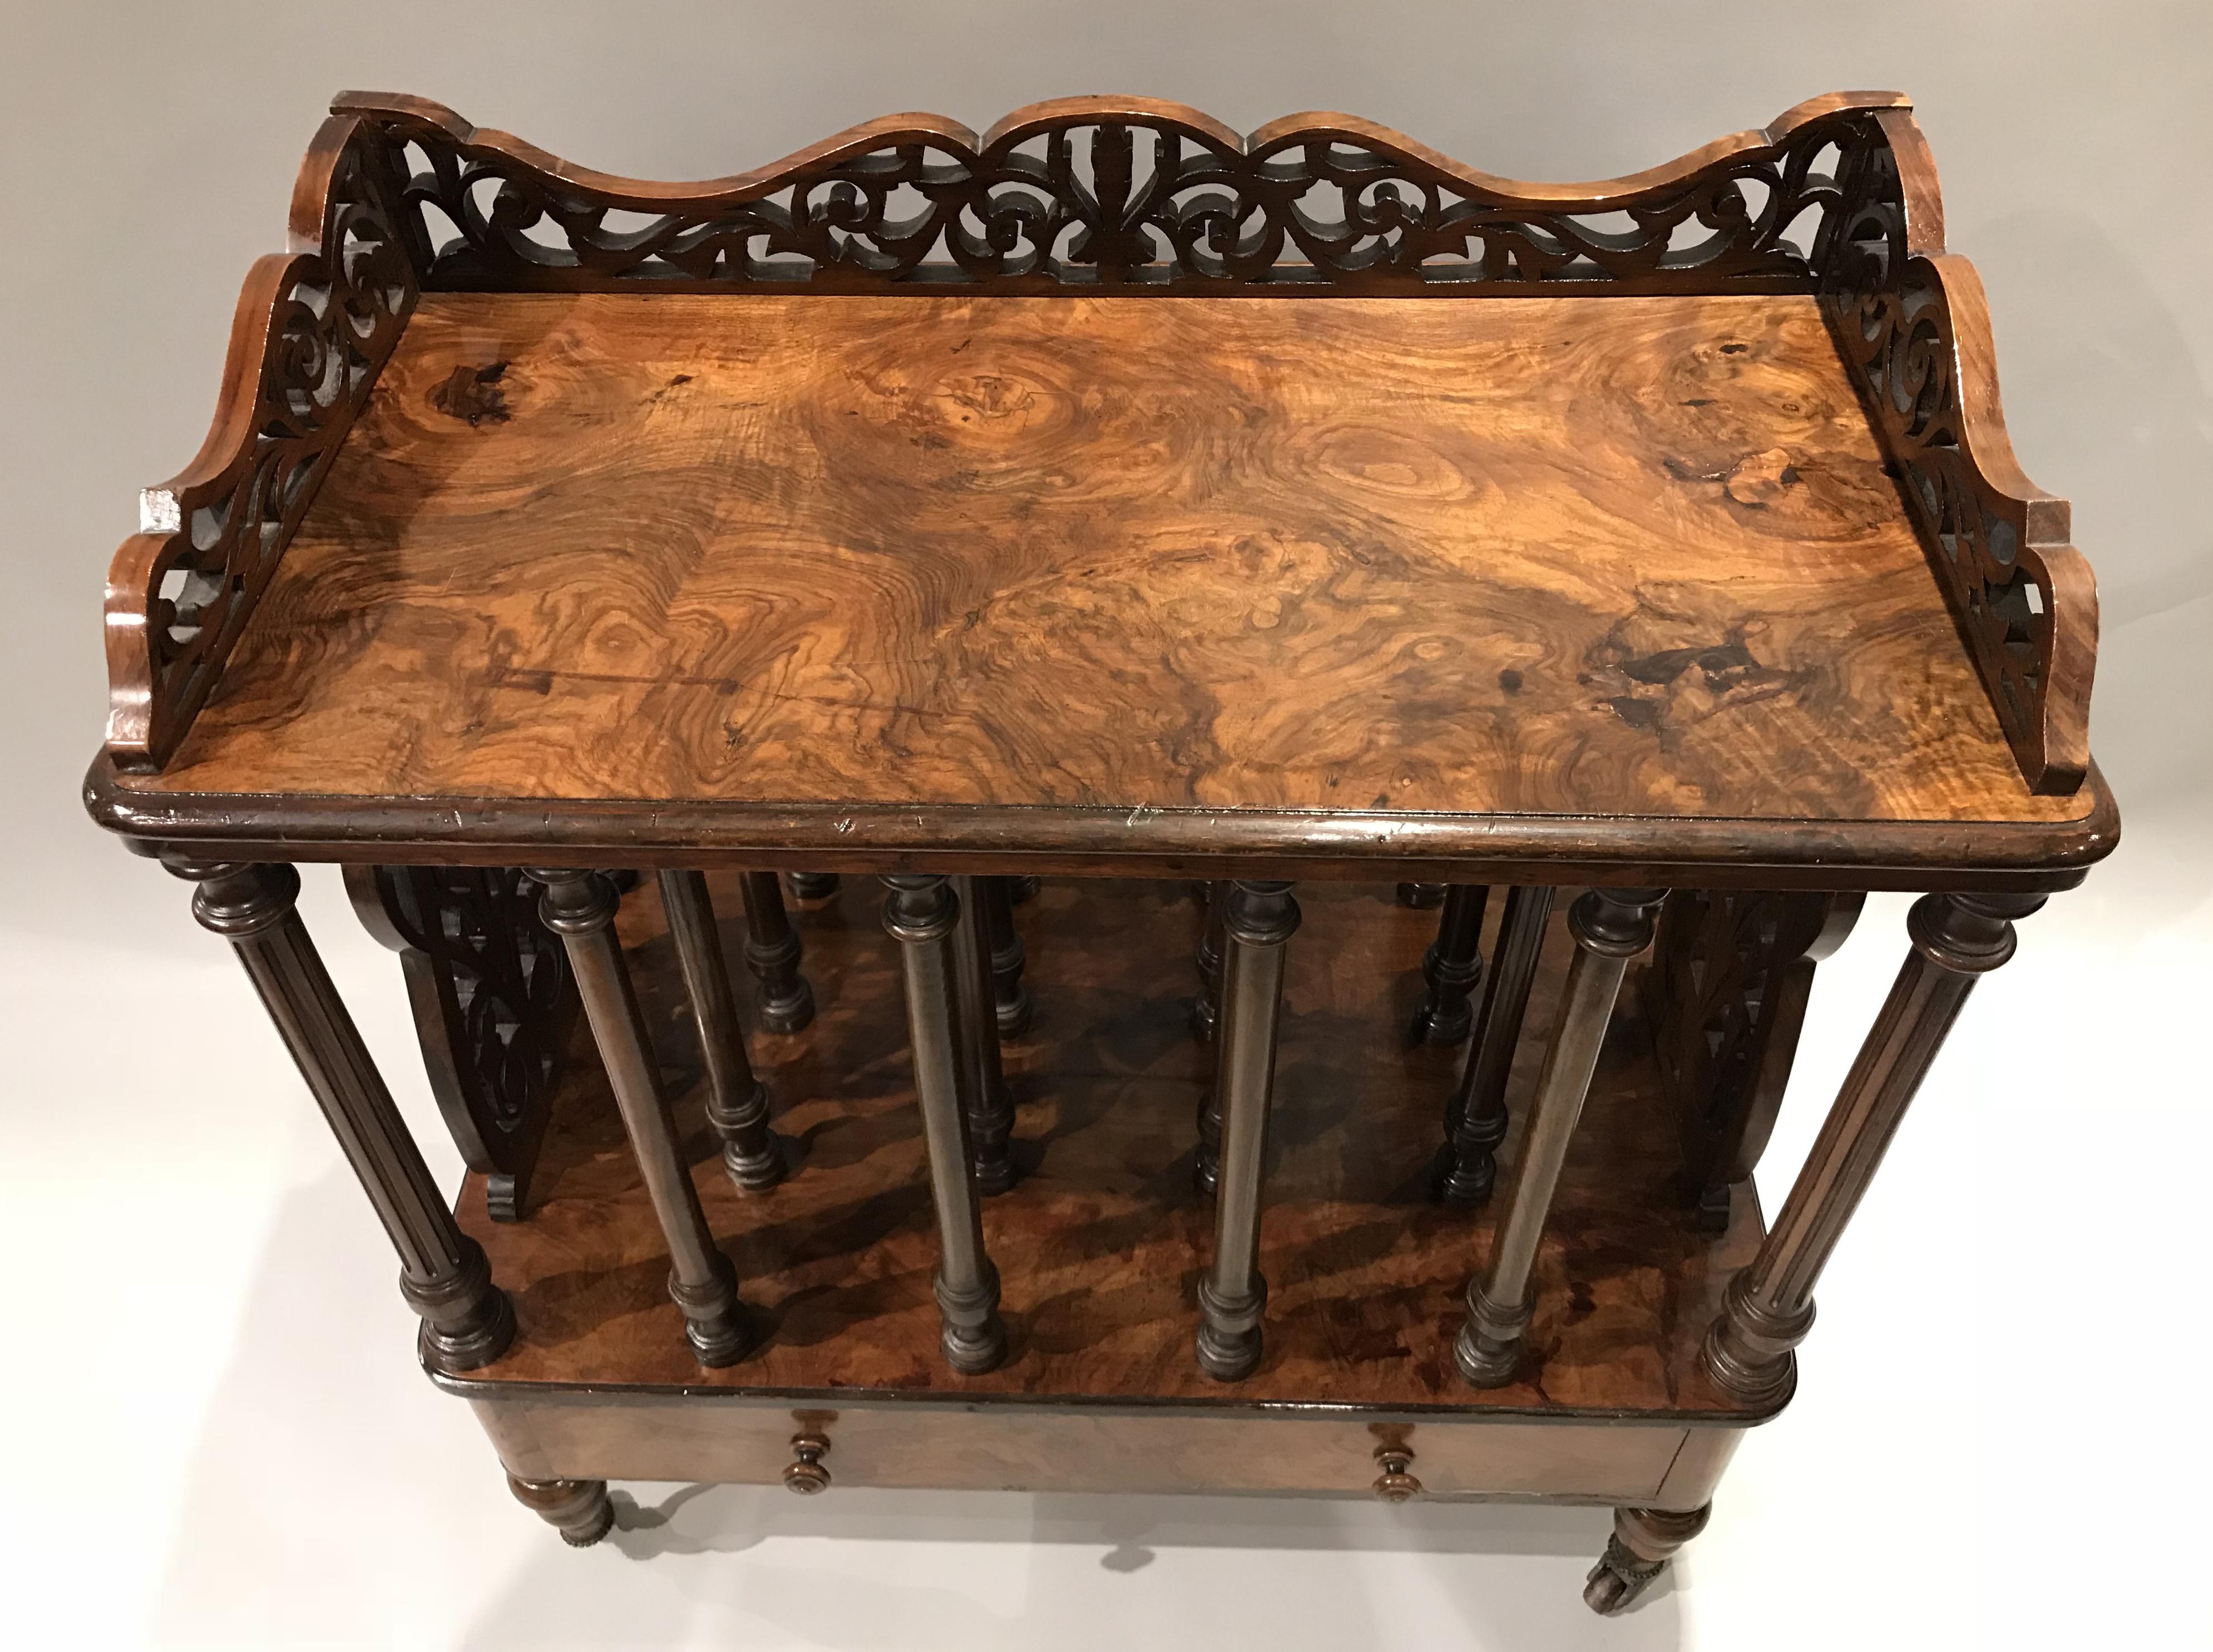 English William IV Burled Walnut Canterbury with Single Drawer In Good Condition For Sale In Milford, NH